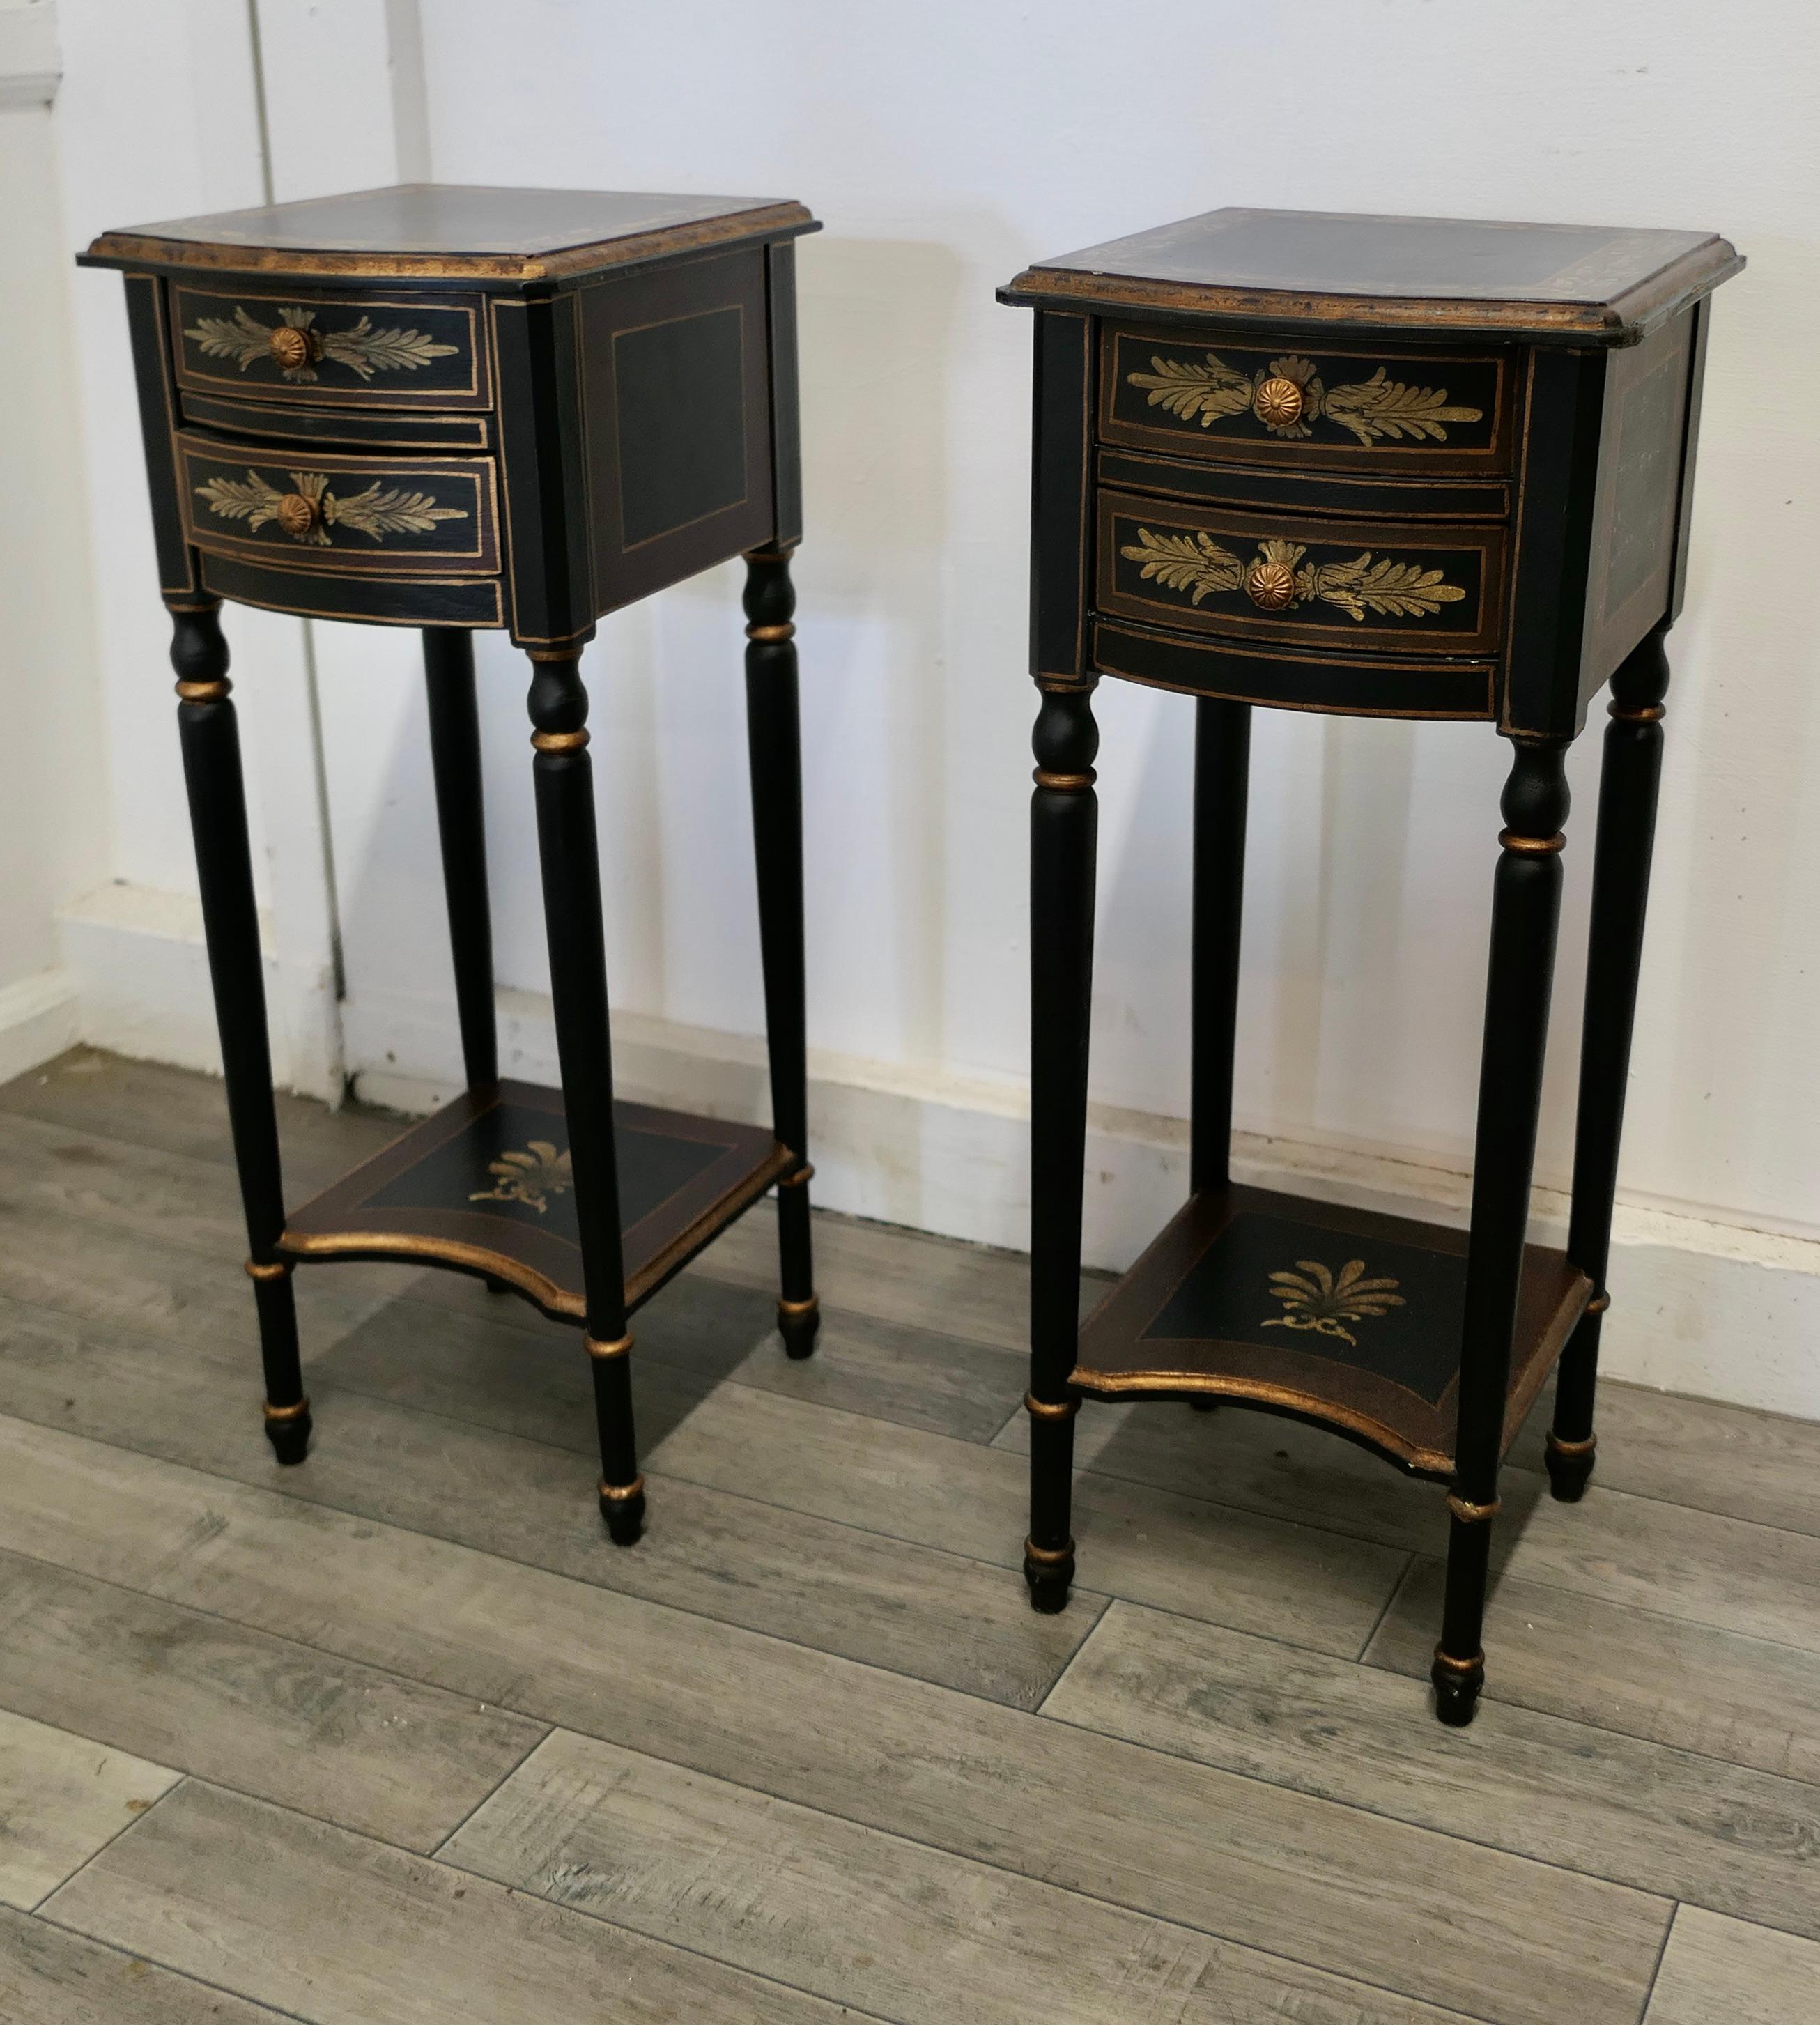 Pair of Regency Style painted side tables or night tables.

These lovely little tables stand on turned legs with and undertier at the bottom and 2 small drawers above, they are painted Black, Green and Gilt in the Regency style 

The tables are